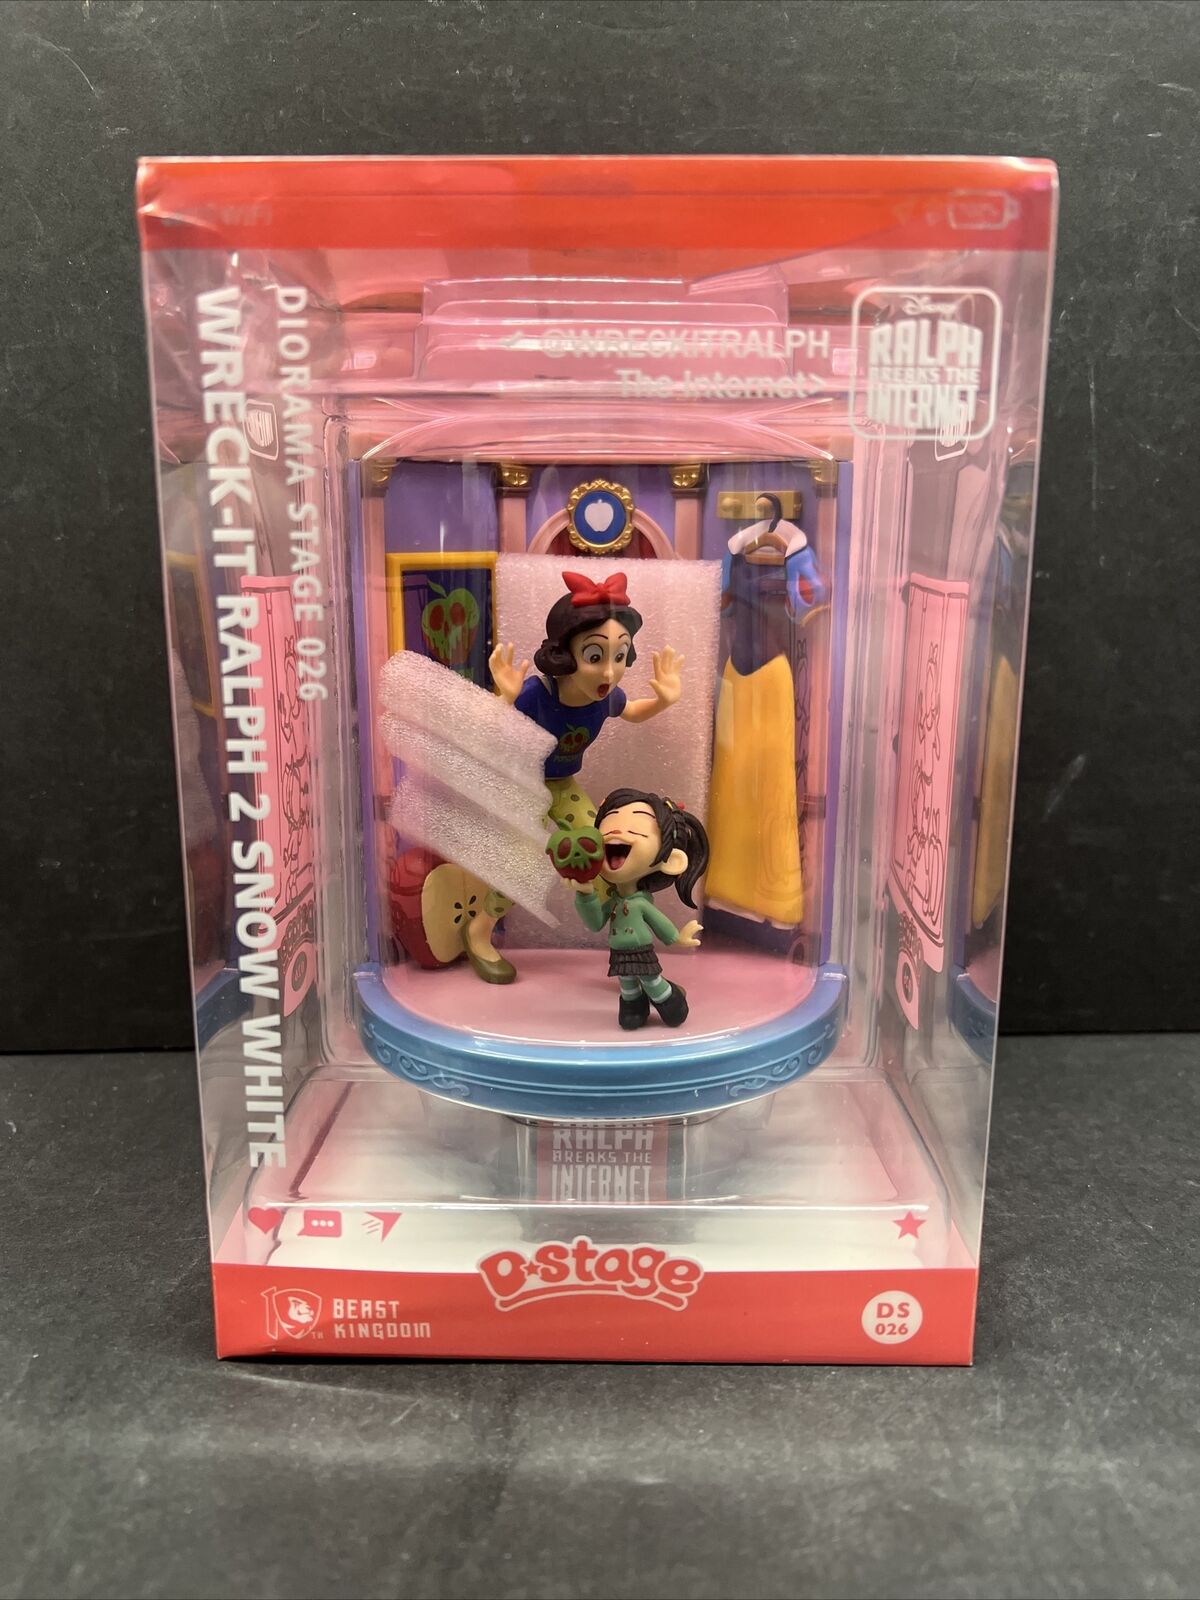 Disney D-Stage DS-026 Wreck-It Ralph Snow White PX Previews Exclusive